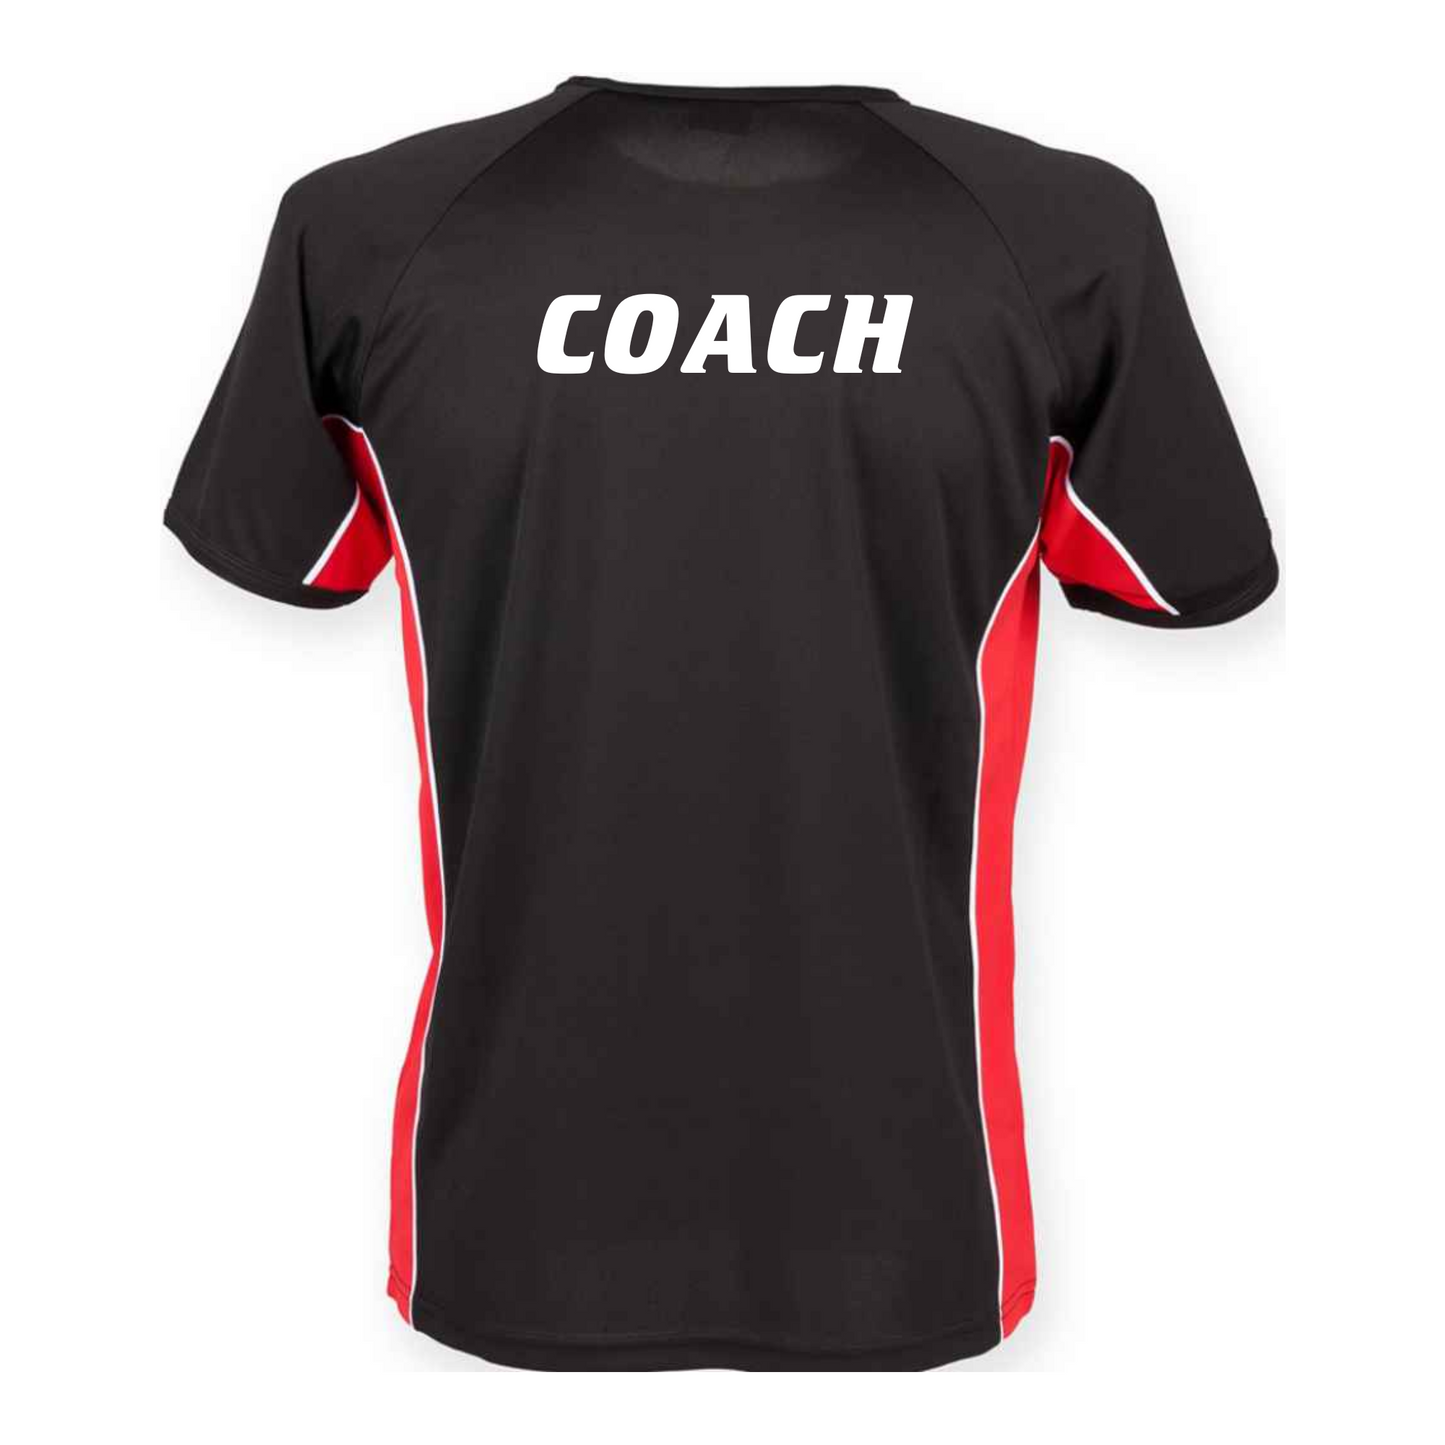 Falcon Spartak COACH Contrast T-Shirt Black with Red Panel (LV240LV242/01/02)